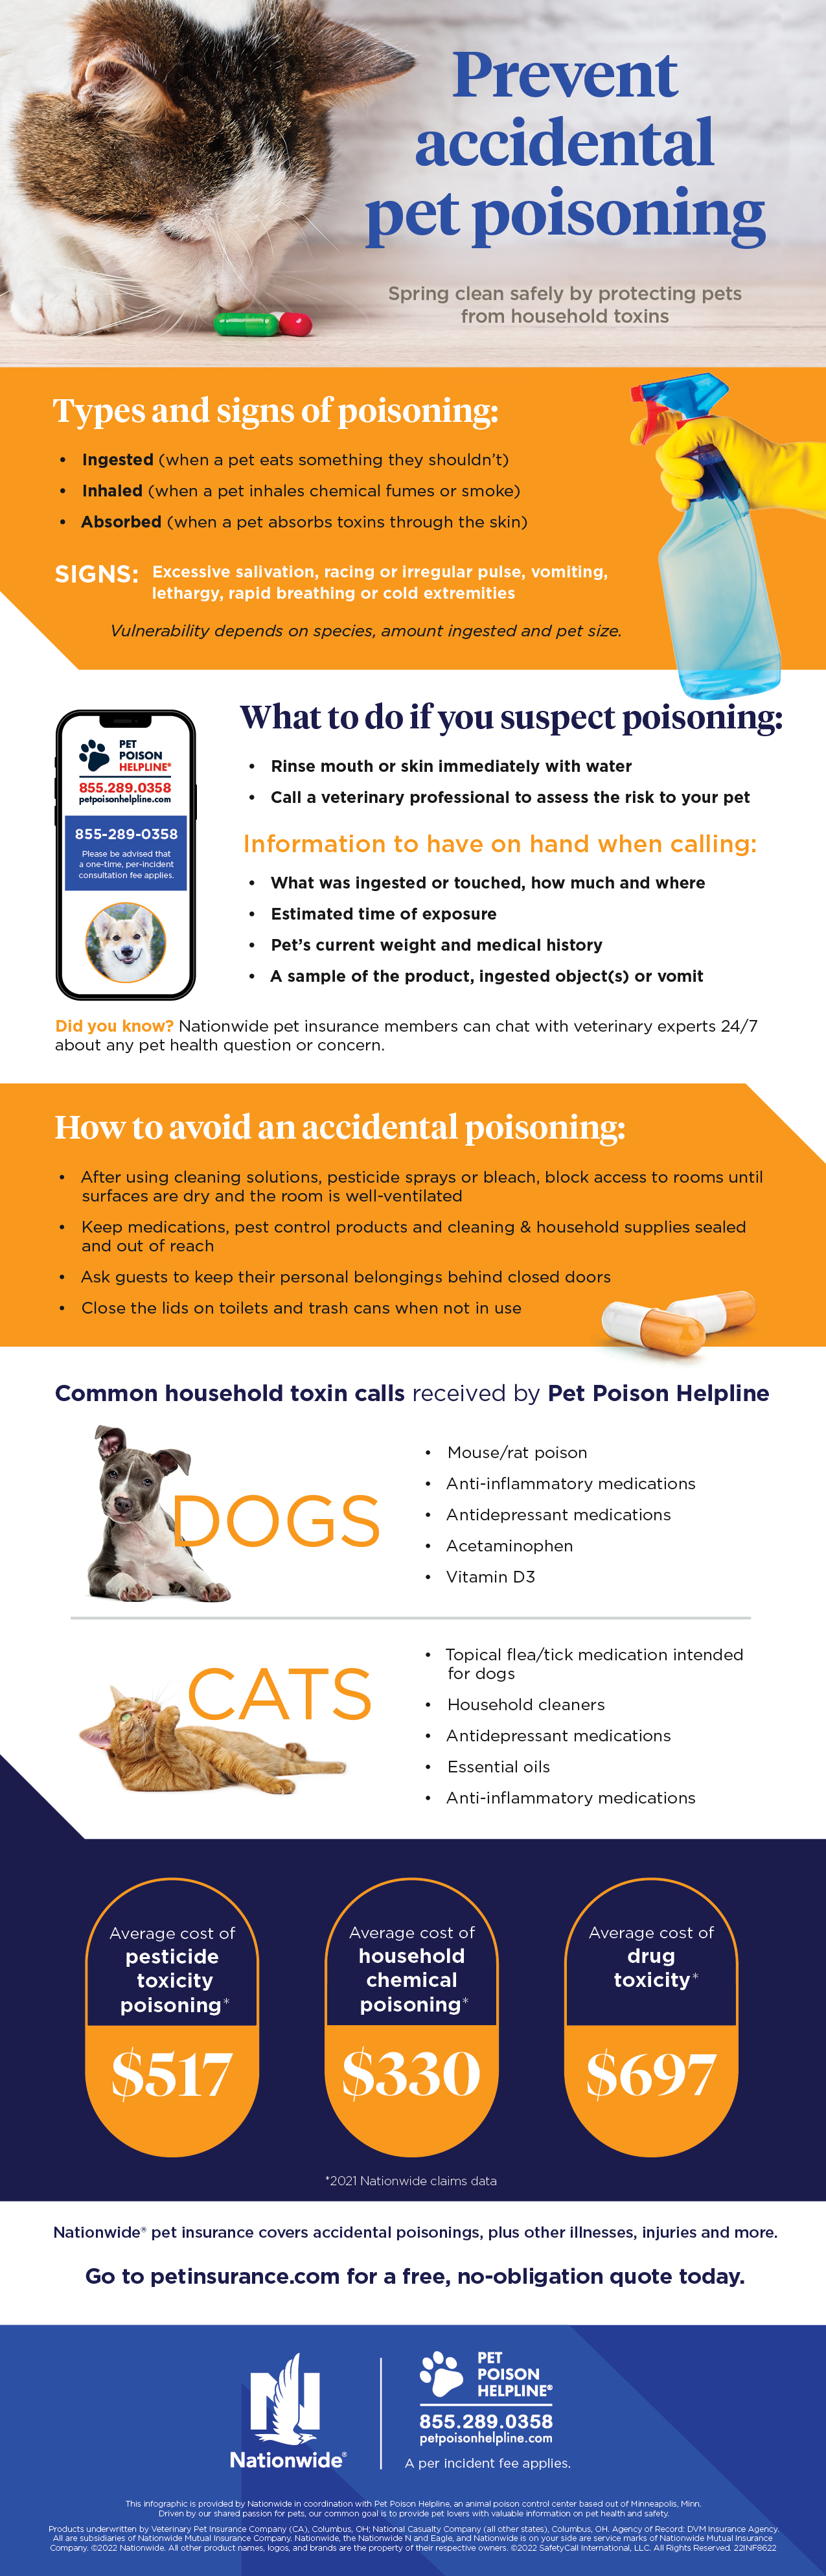 Pet poisoning infographic 